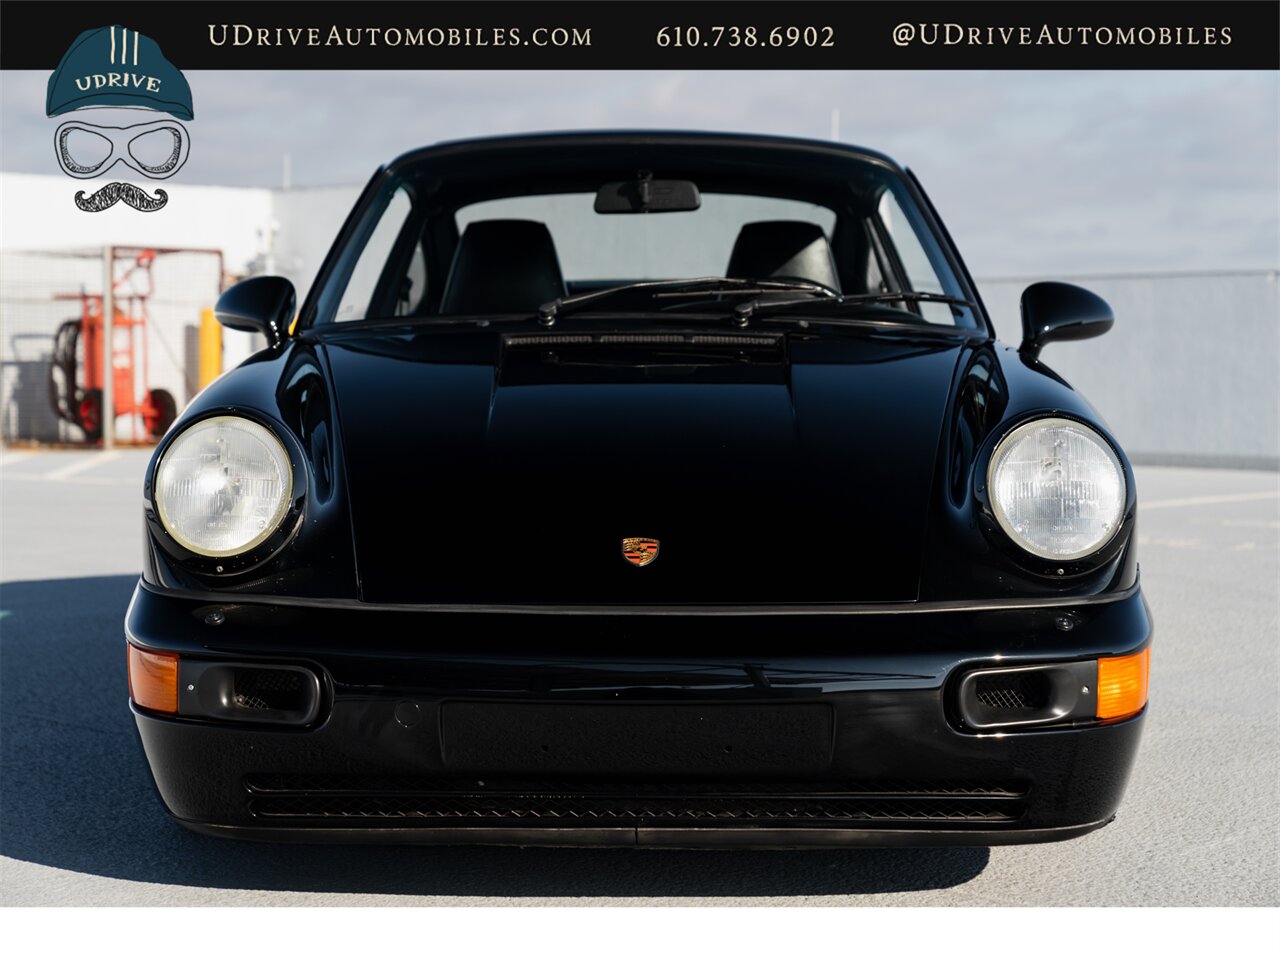 1989 Porsche 911 C4  964 Carrera 4 C4 5 Speed Manual $33k in Recent Service History - Photo 14 - West Chester, PA 19382